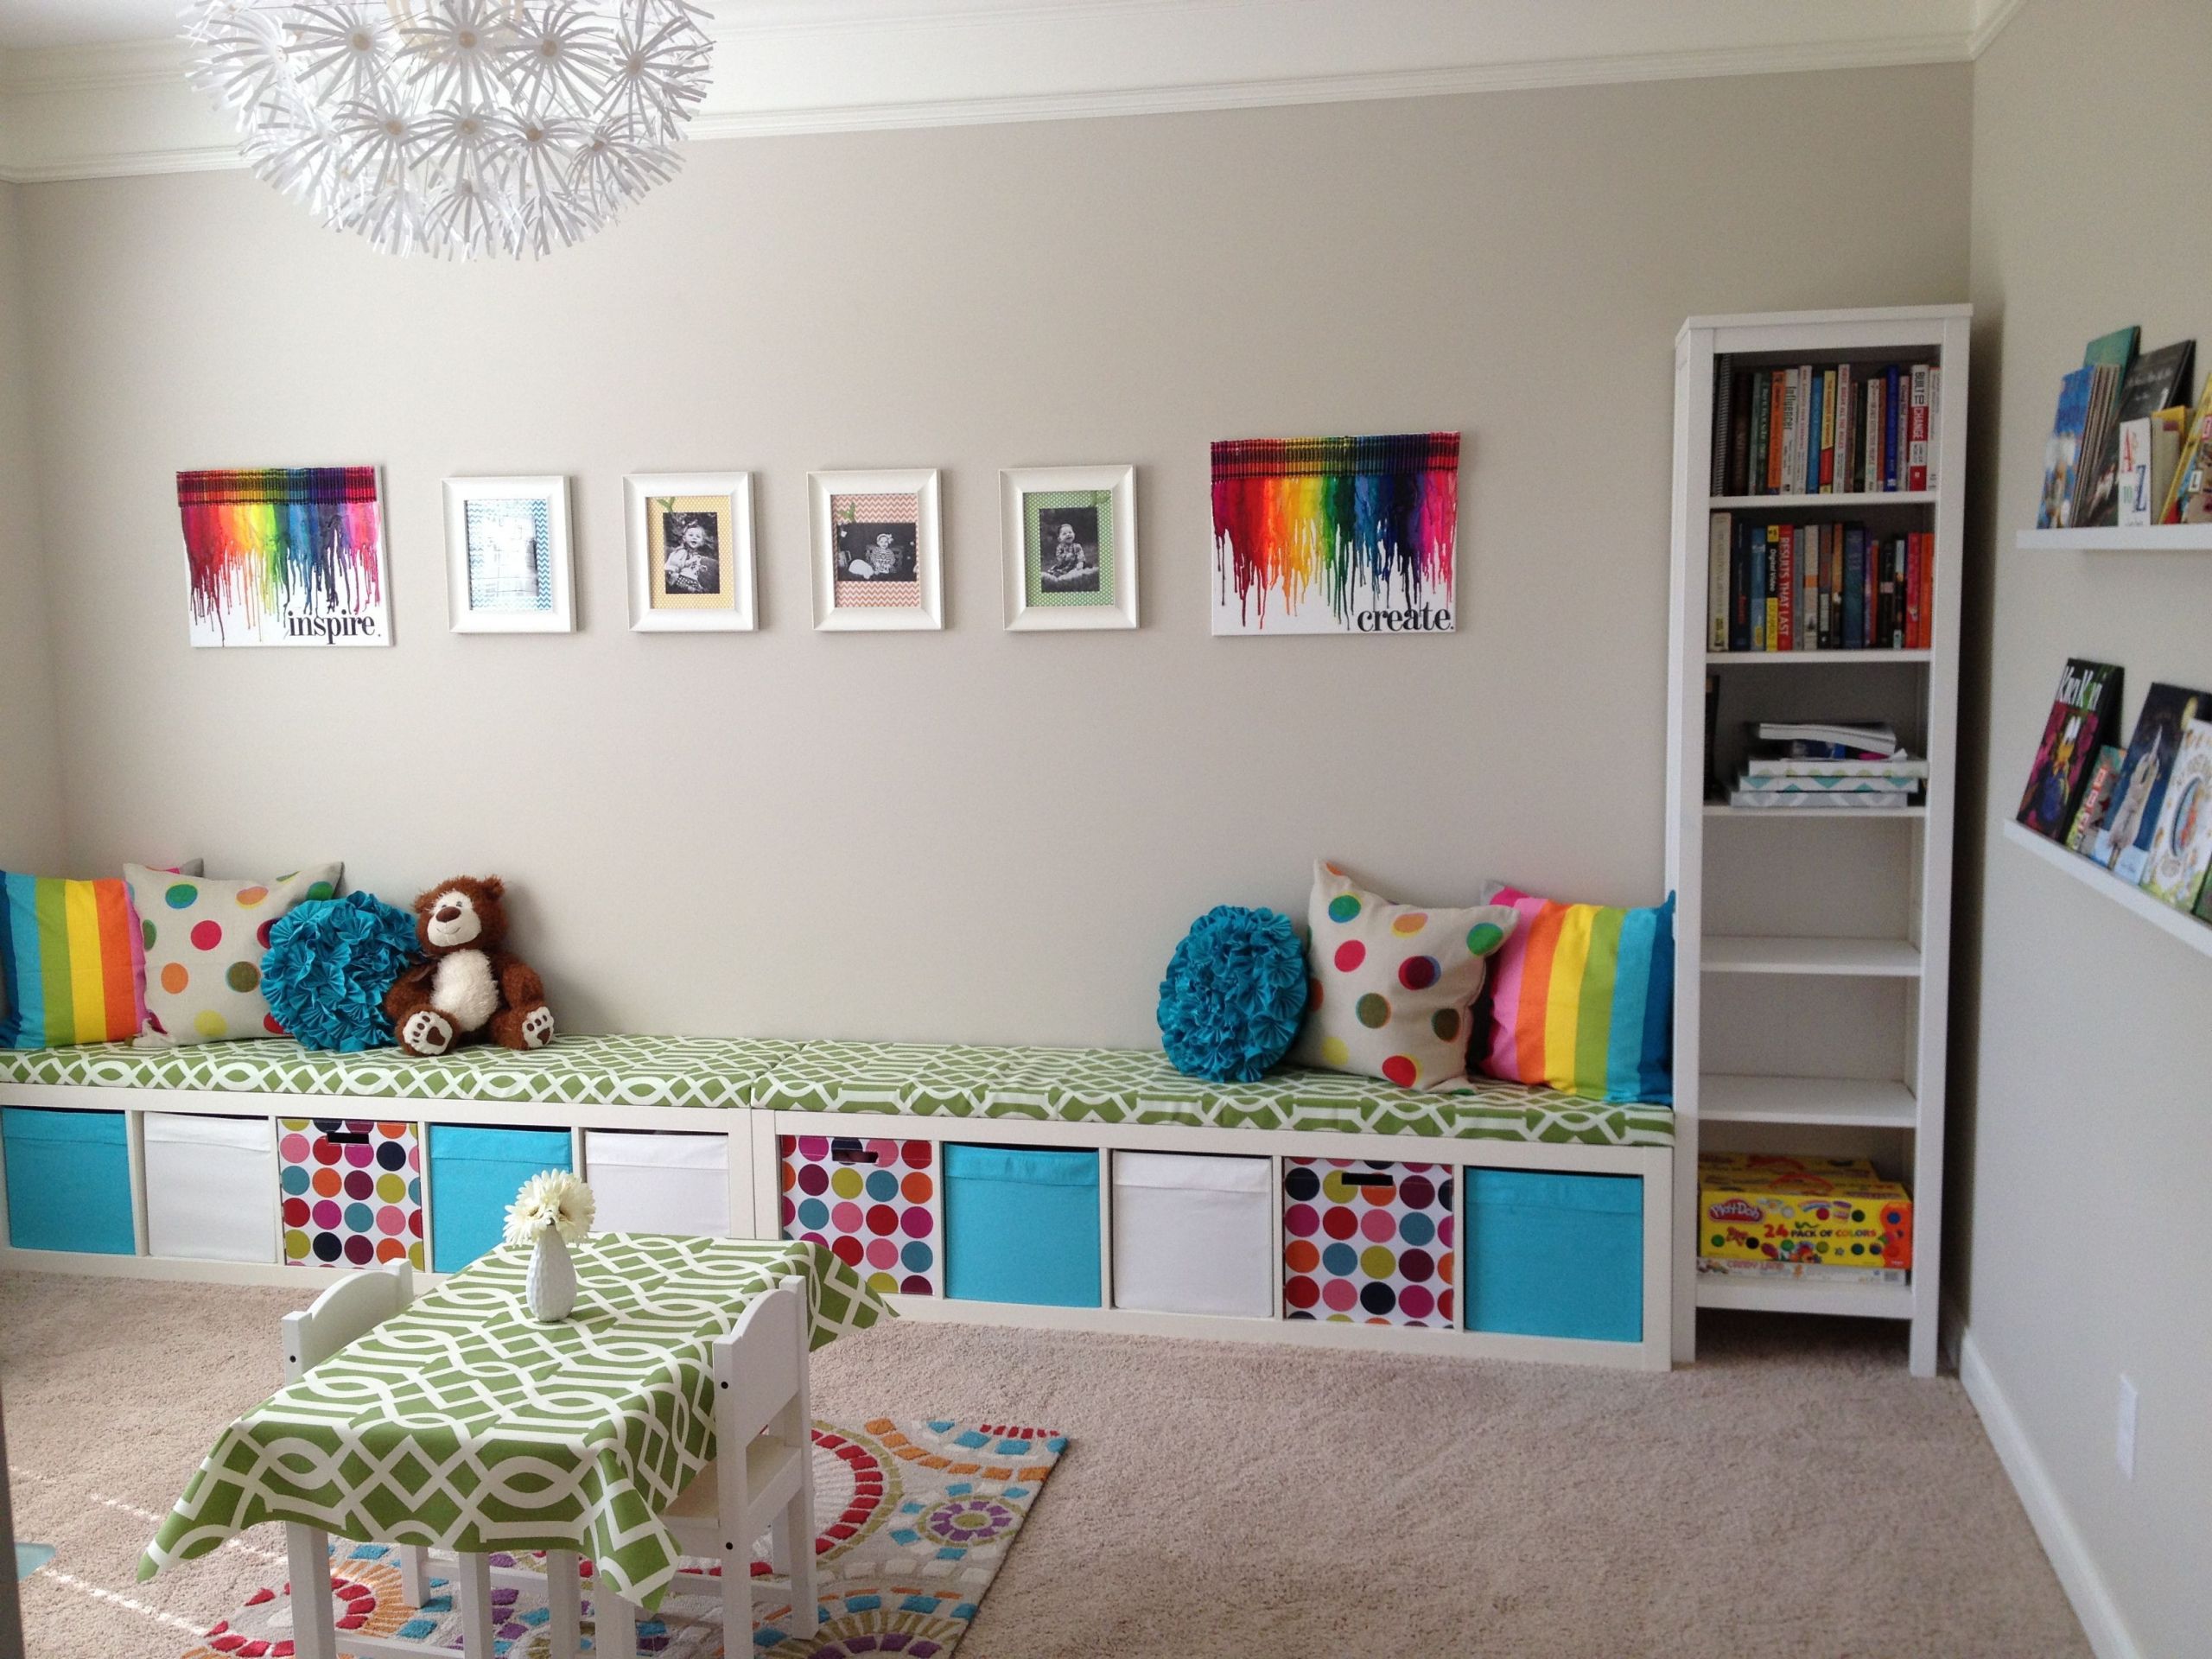 DIY Kids Playrooms
 5 Smart and Creative Playroom Ideas on a Bud for the